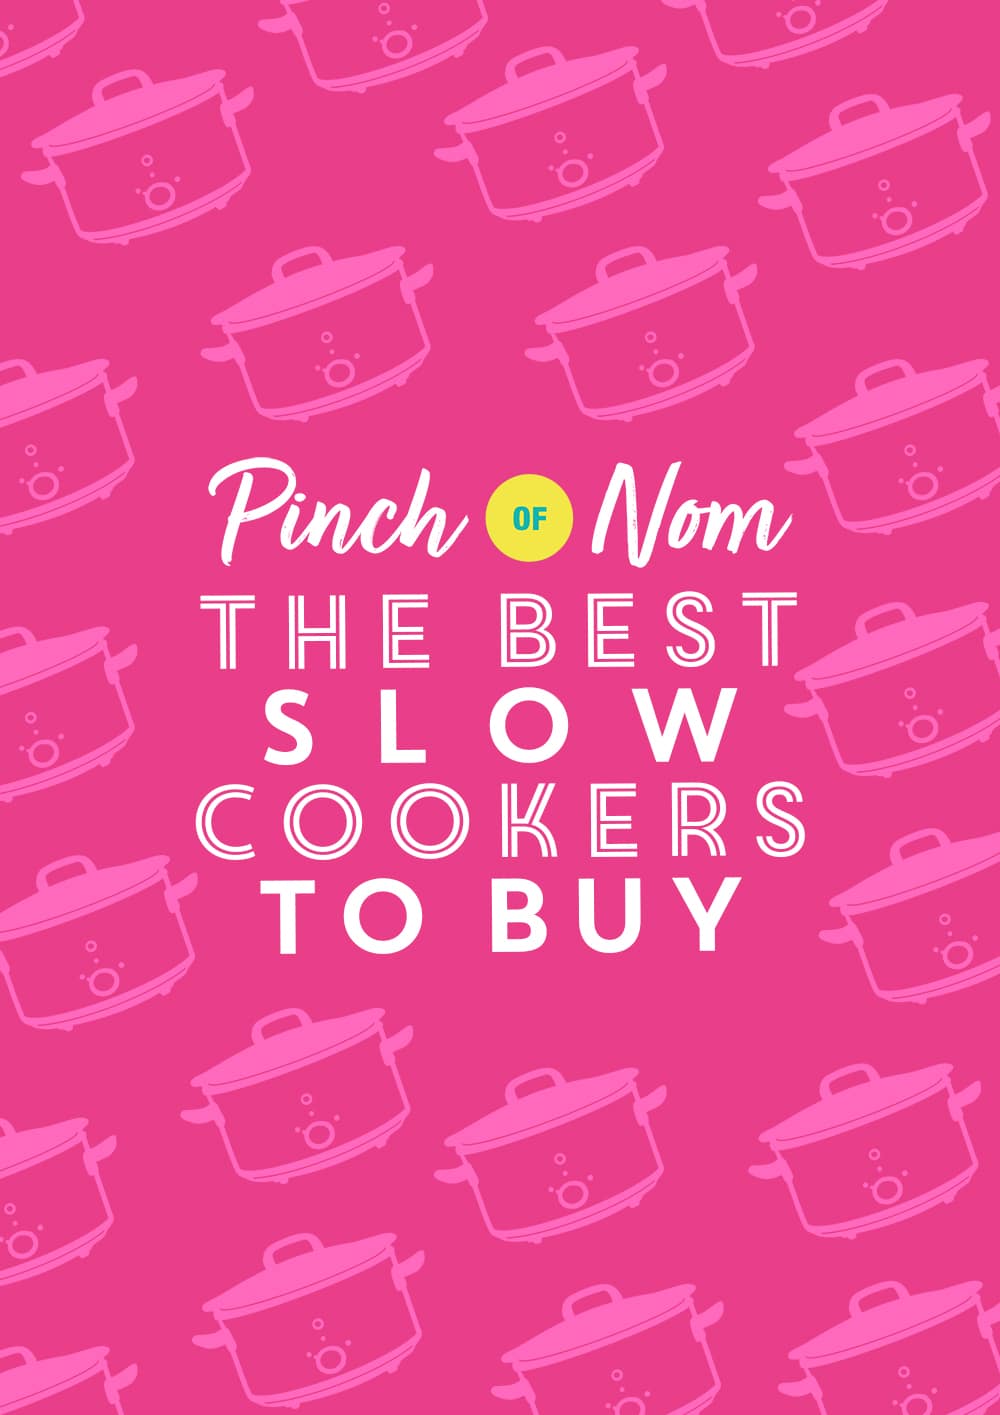 The best slow cookers to buy - Pinch of Nom Slimming Recipes